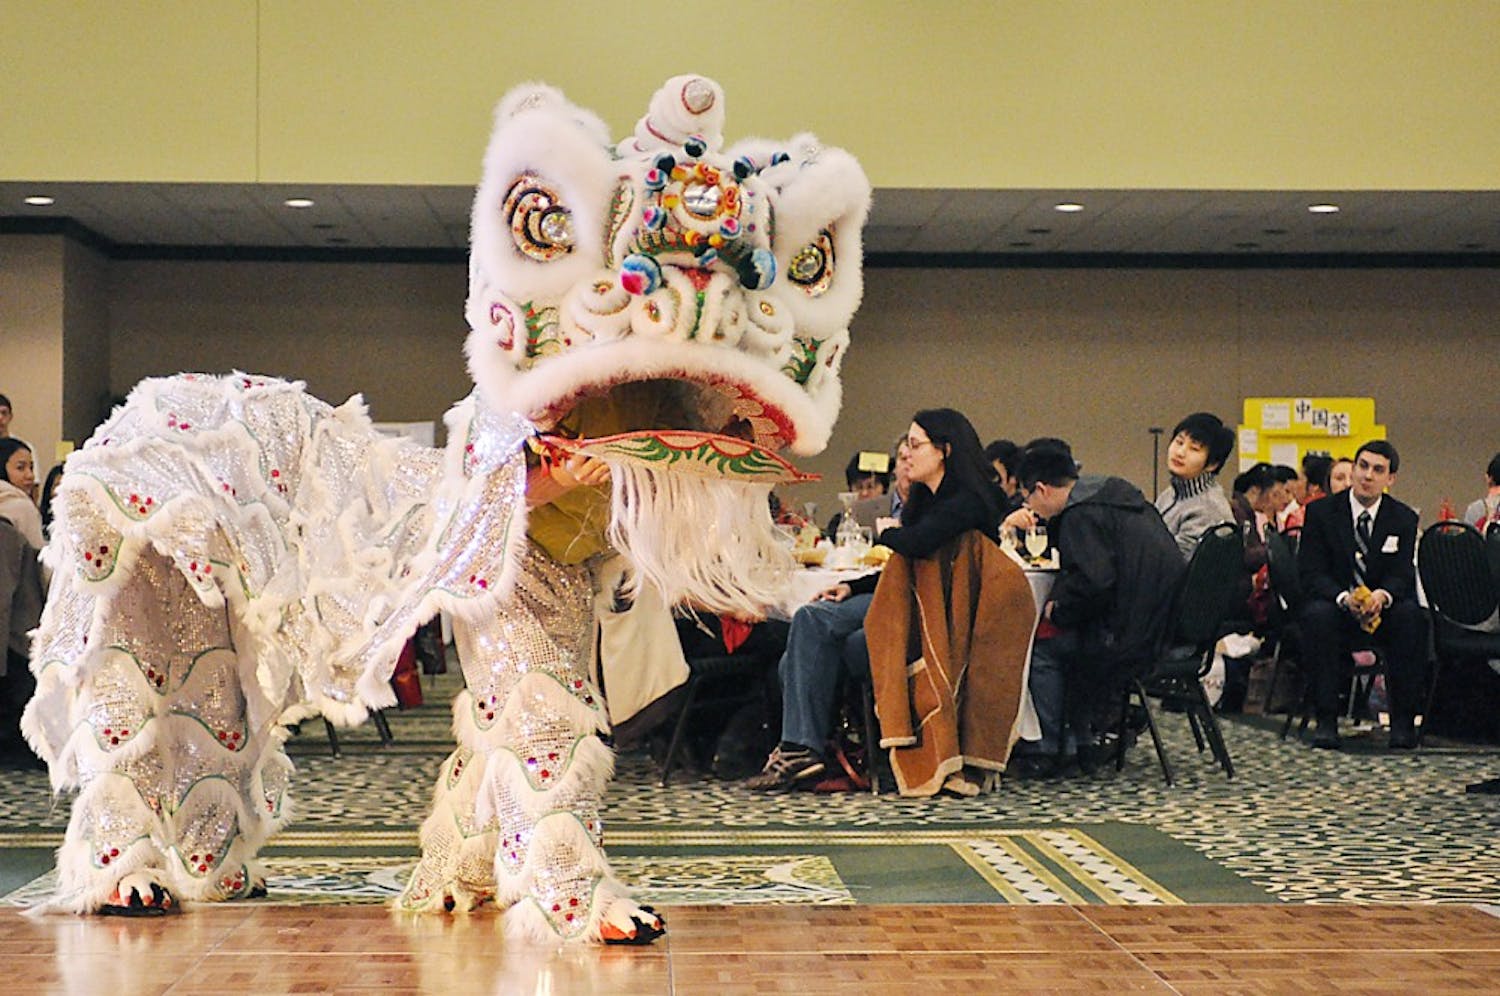 Several performances were held last Sunday during the 2010 Chinese Week  kick off gala, held in the EMU student center ballroom. The event was hosted by Mei Hua Tong Xue Hui, or the American Chinese Students Association.